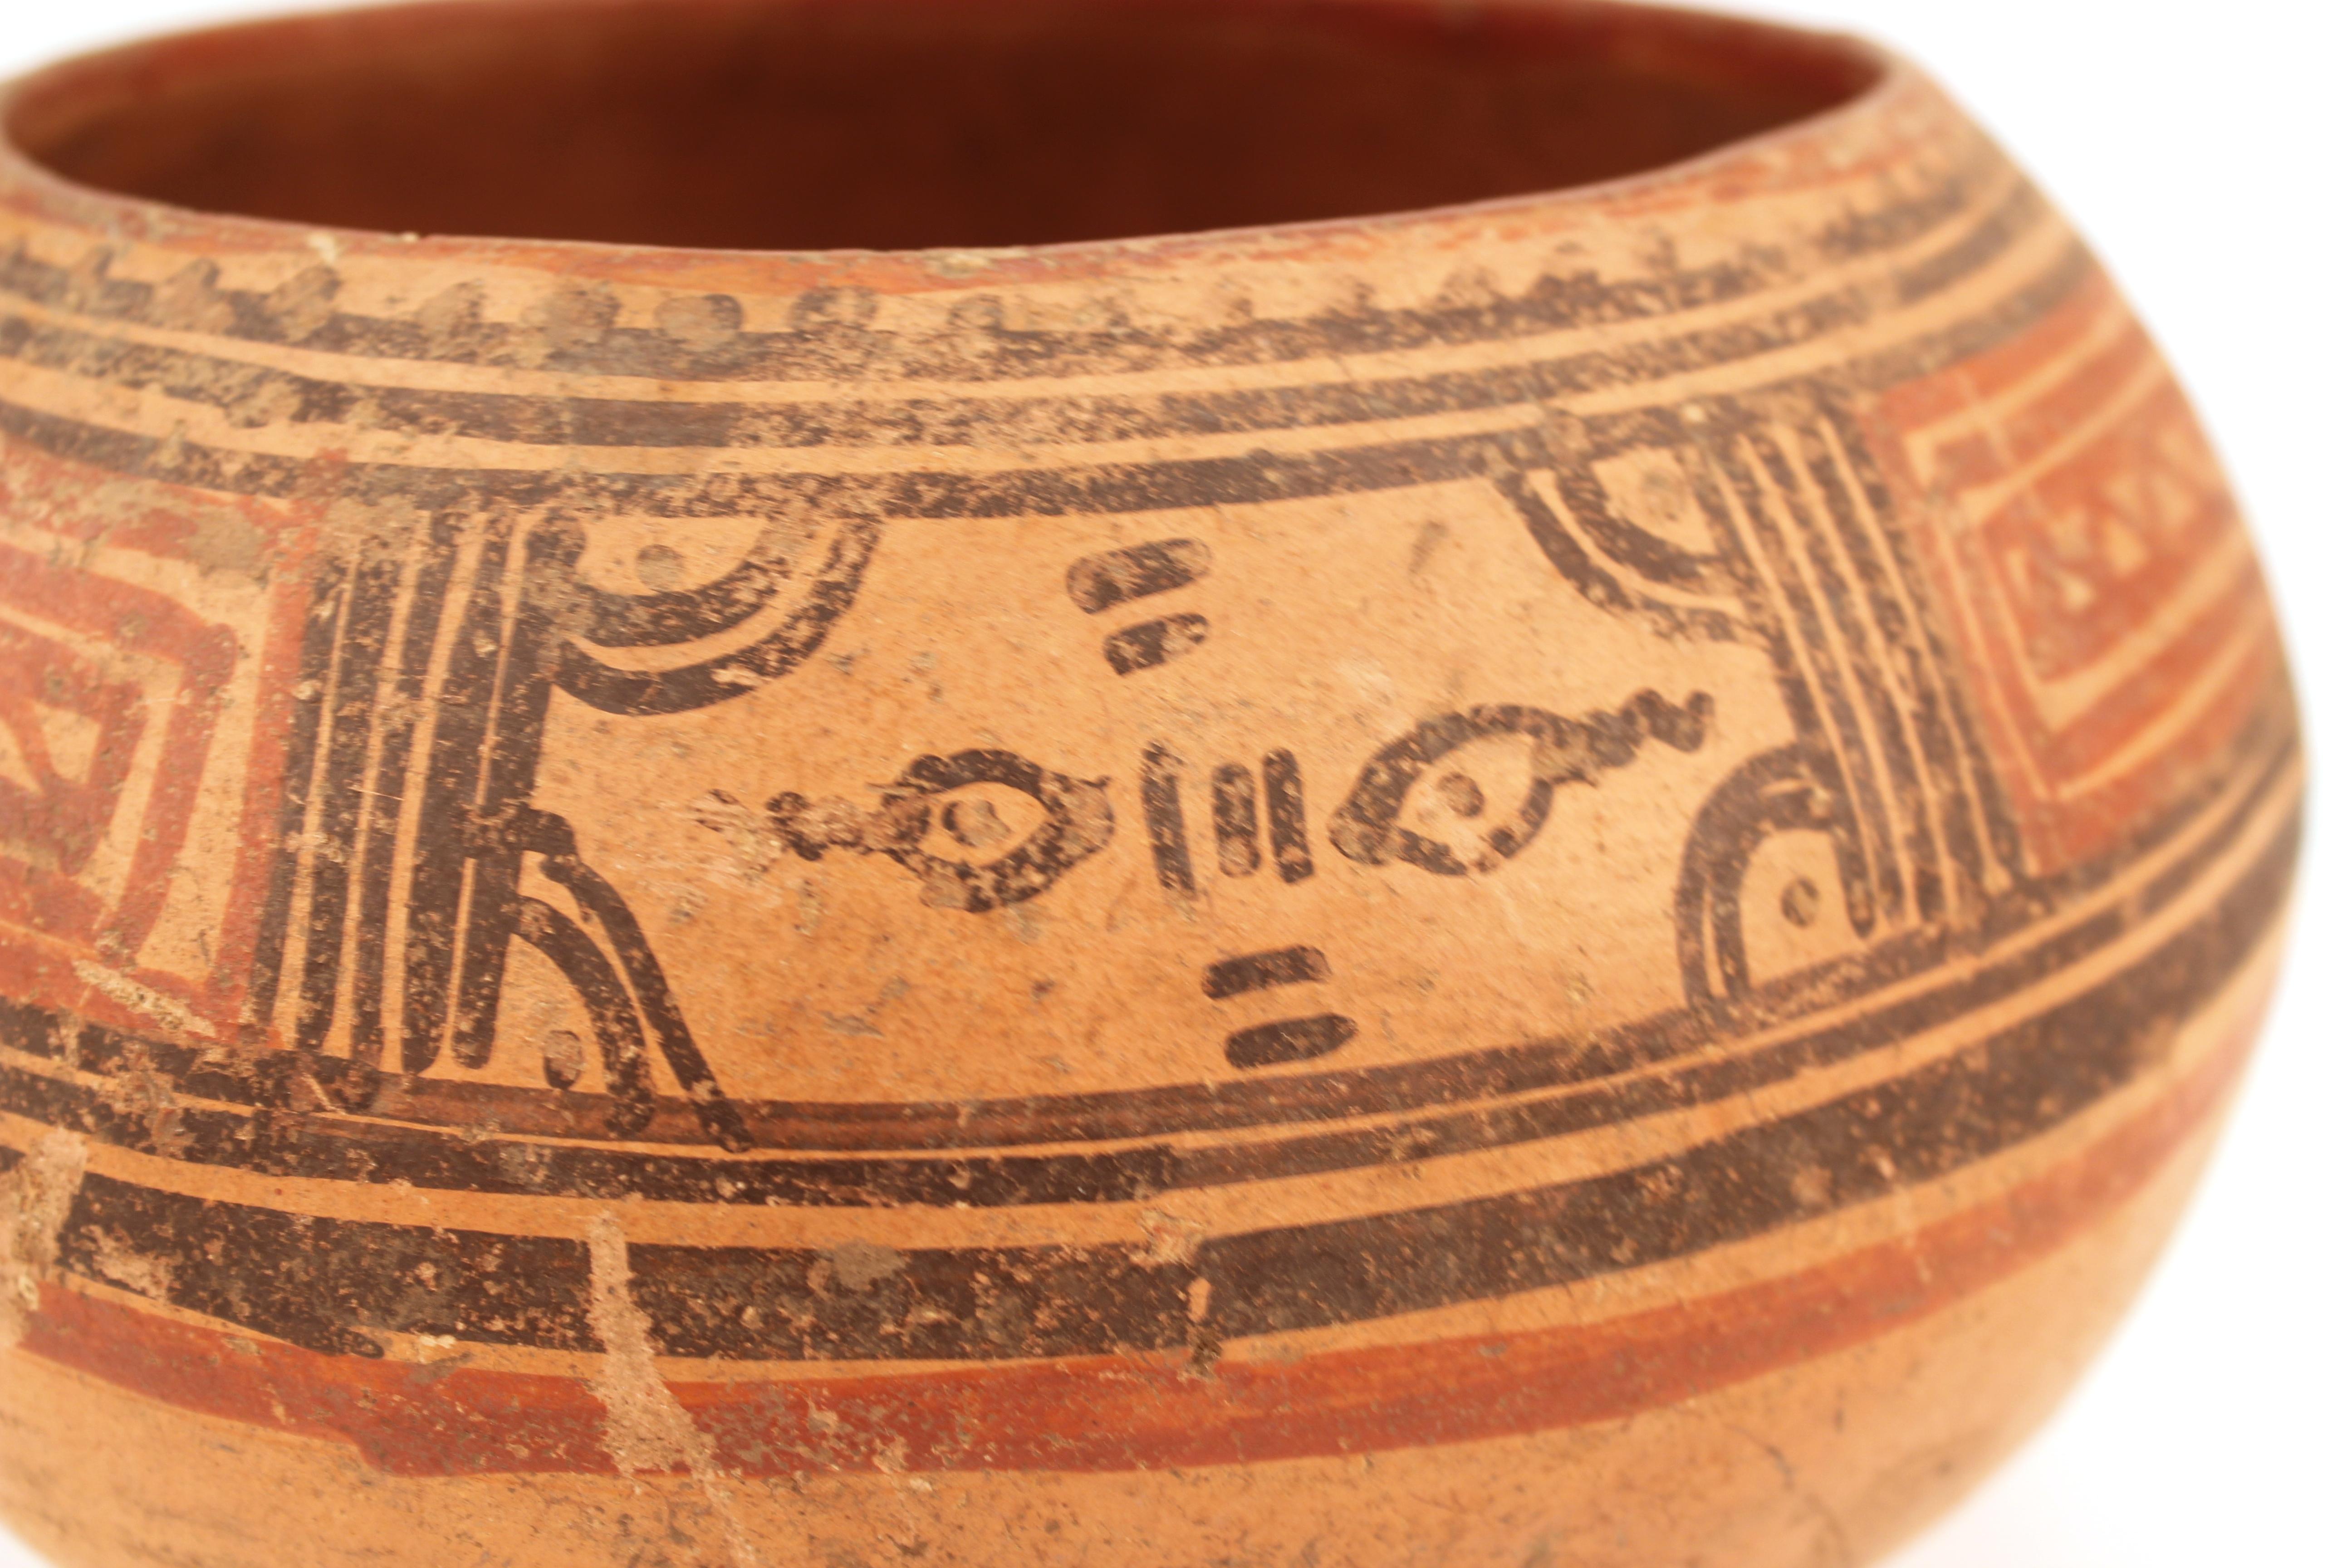 Costa Rican Pre-Columbian Nicoya Pottery Bowl from Costa Rica